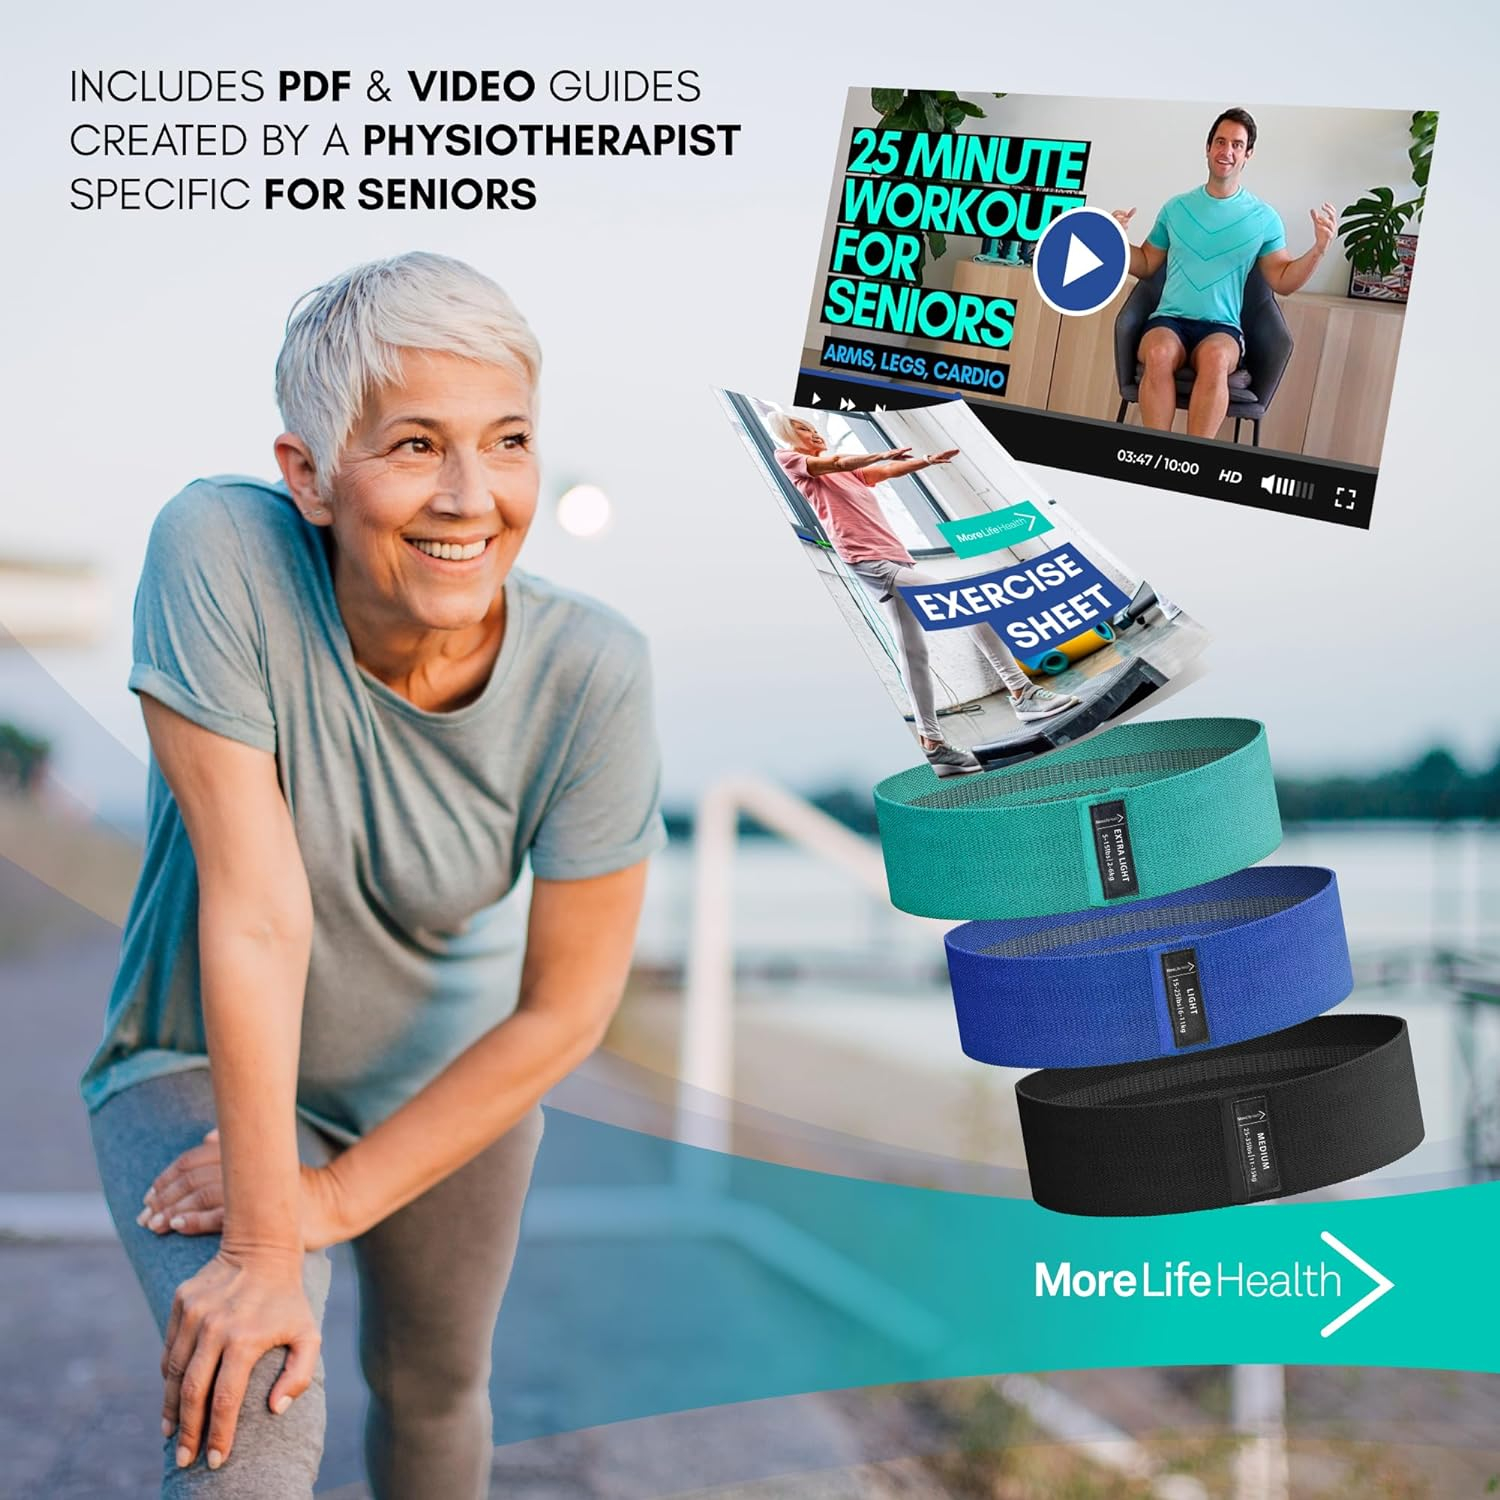 More Life Health Exercise Bands for Seniors 3x Fabric Resistance Bands - 3 Wide Loop Leg Bands for Working Out - Includes Videos and Printable Exercise Instructions - Thigh Hip Booty Resistance Bands